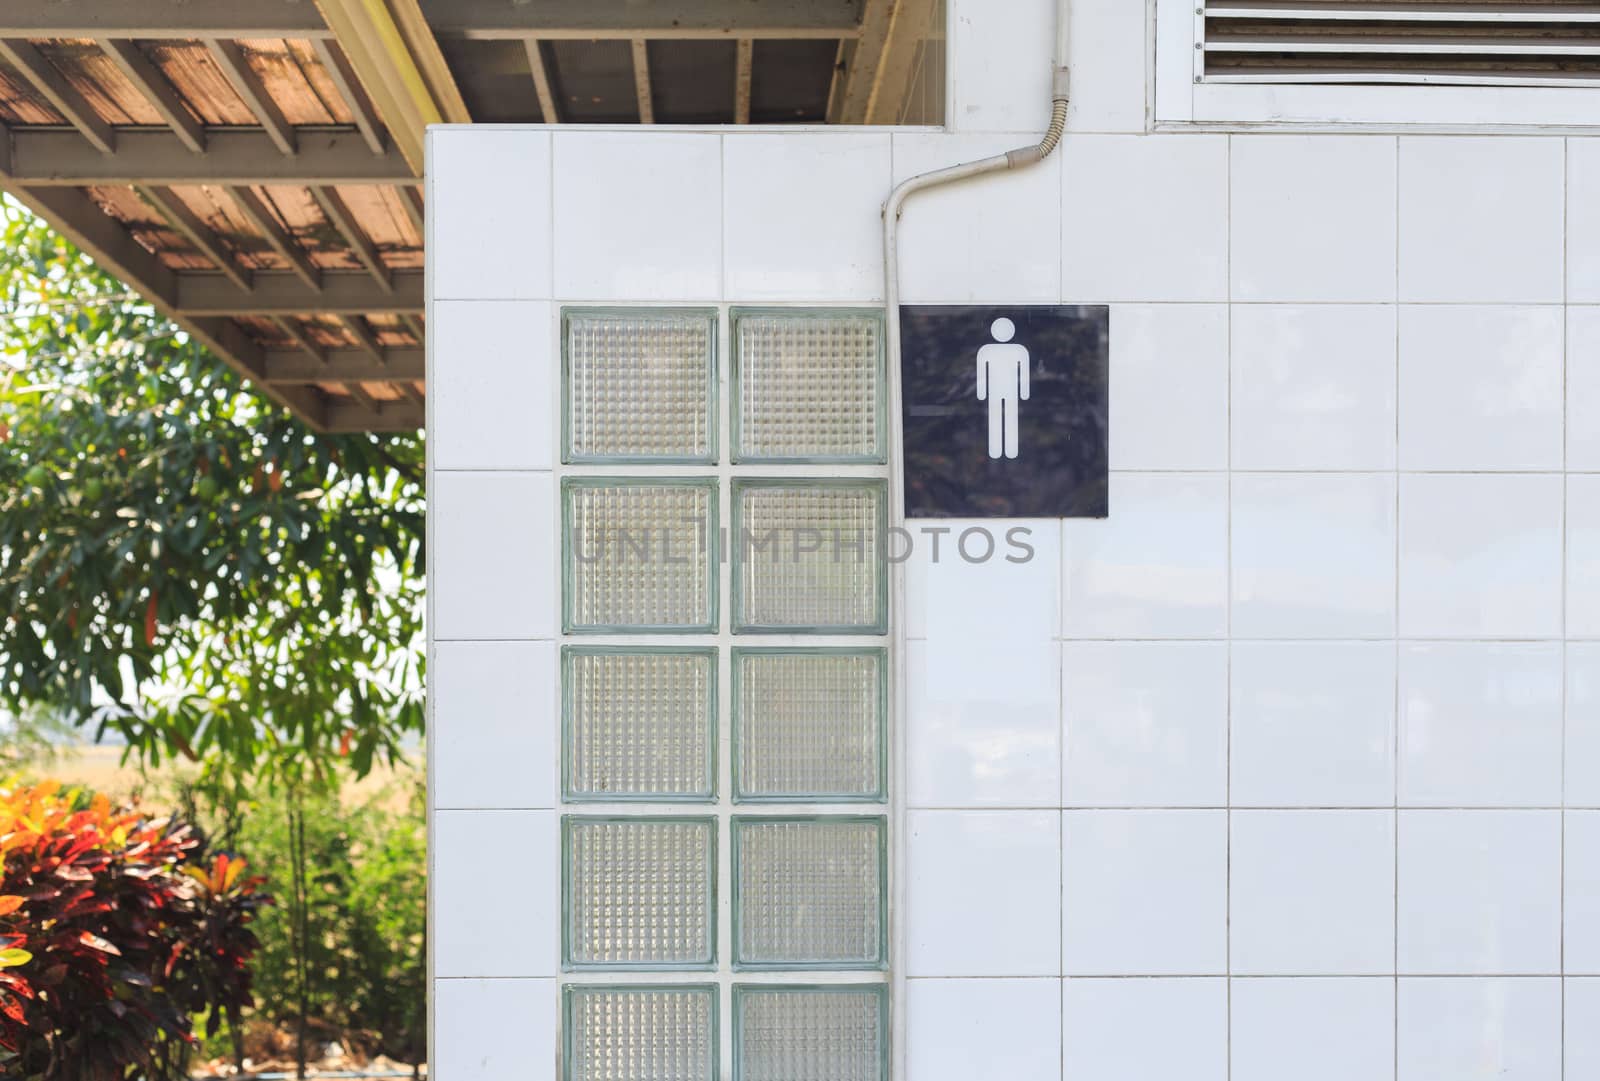 Entrance of the men public toilet by papound